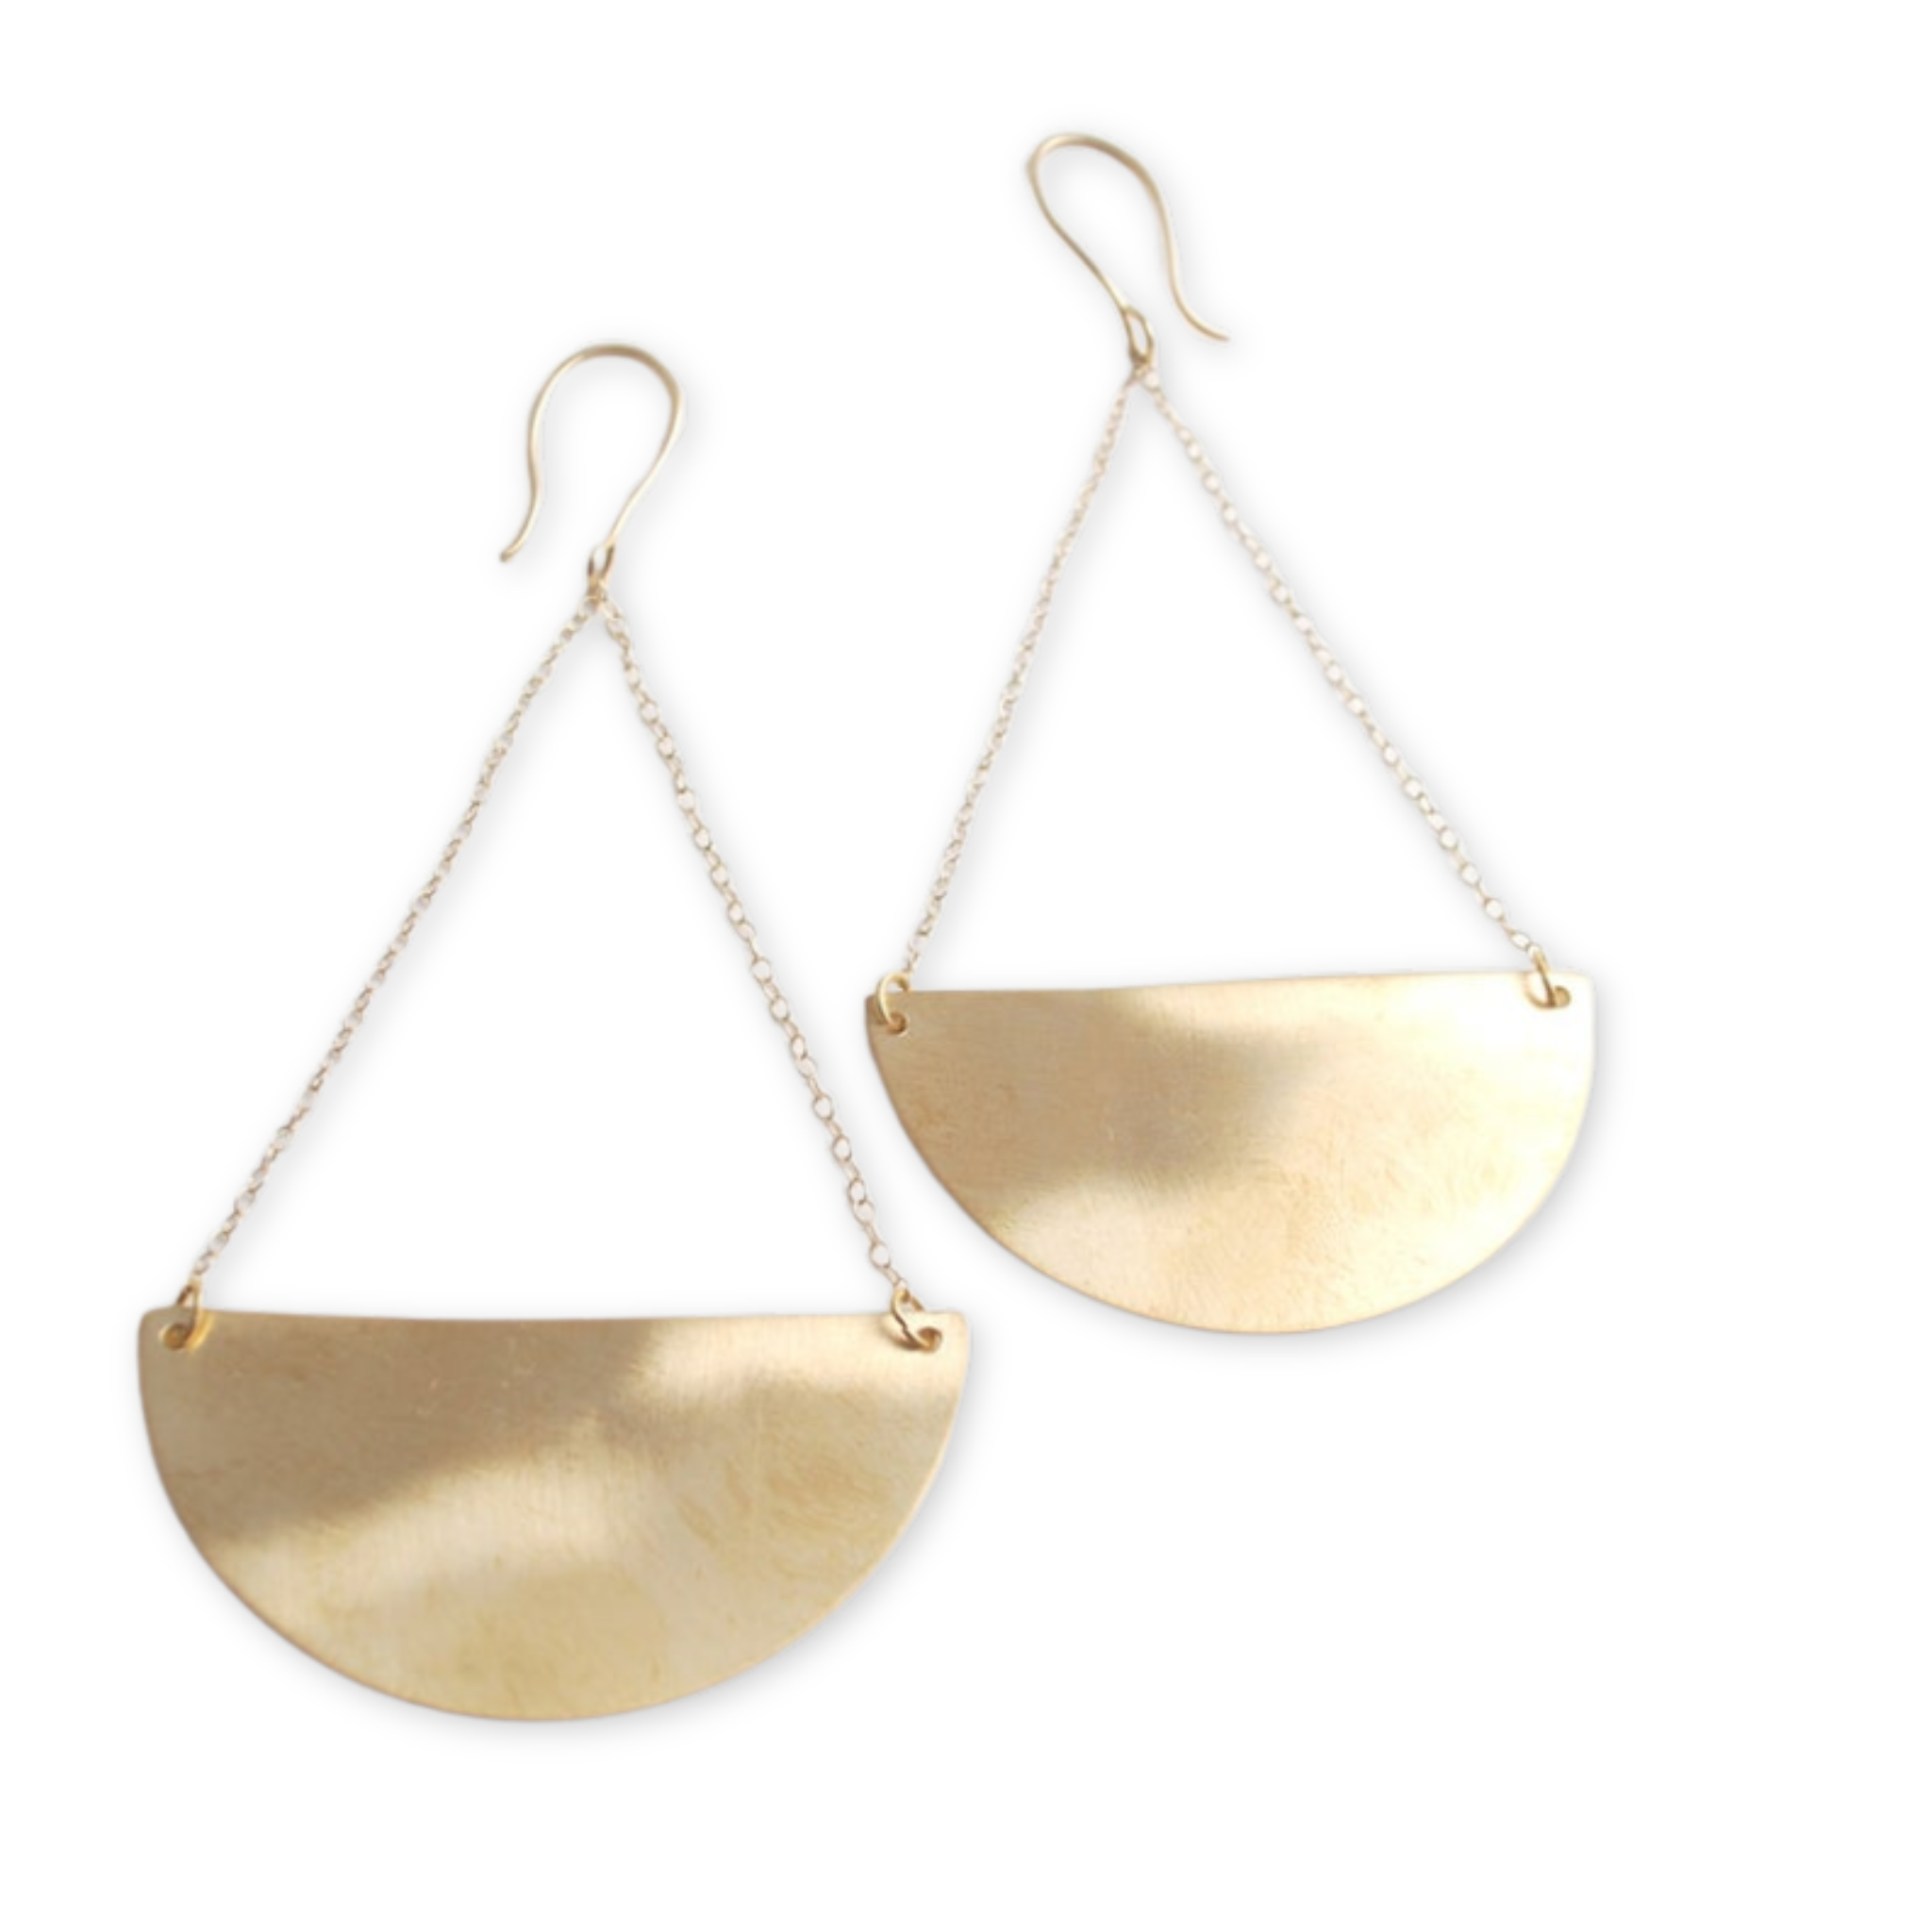 earrings featuring scalloped shaped pendants hang on thin chains